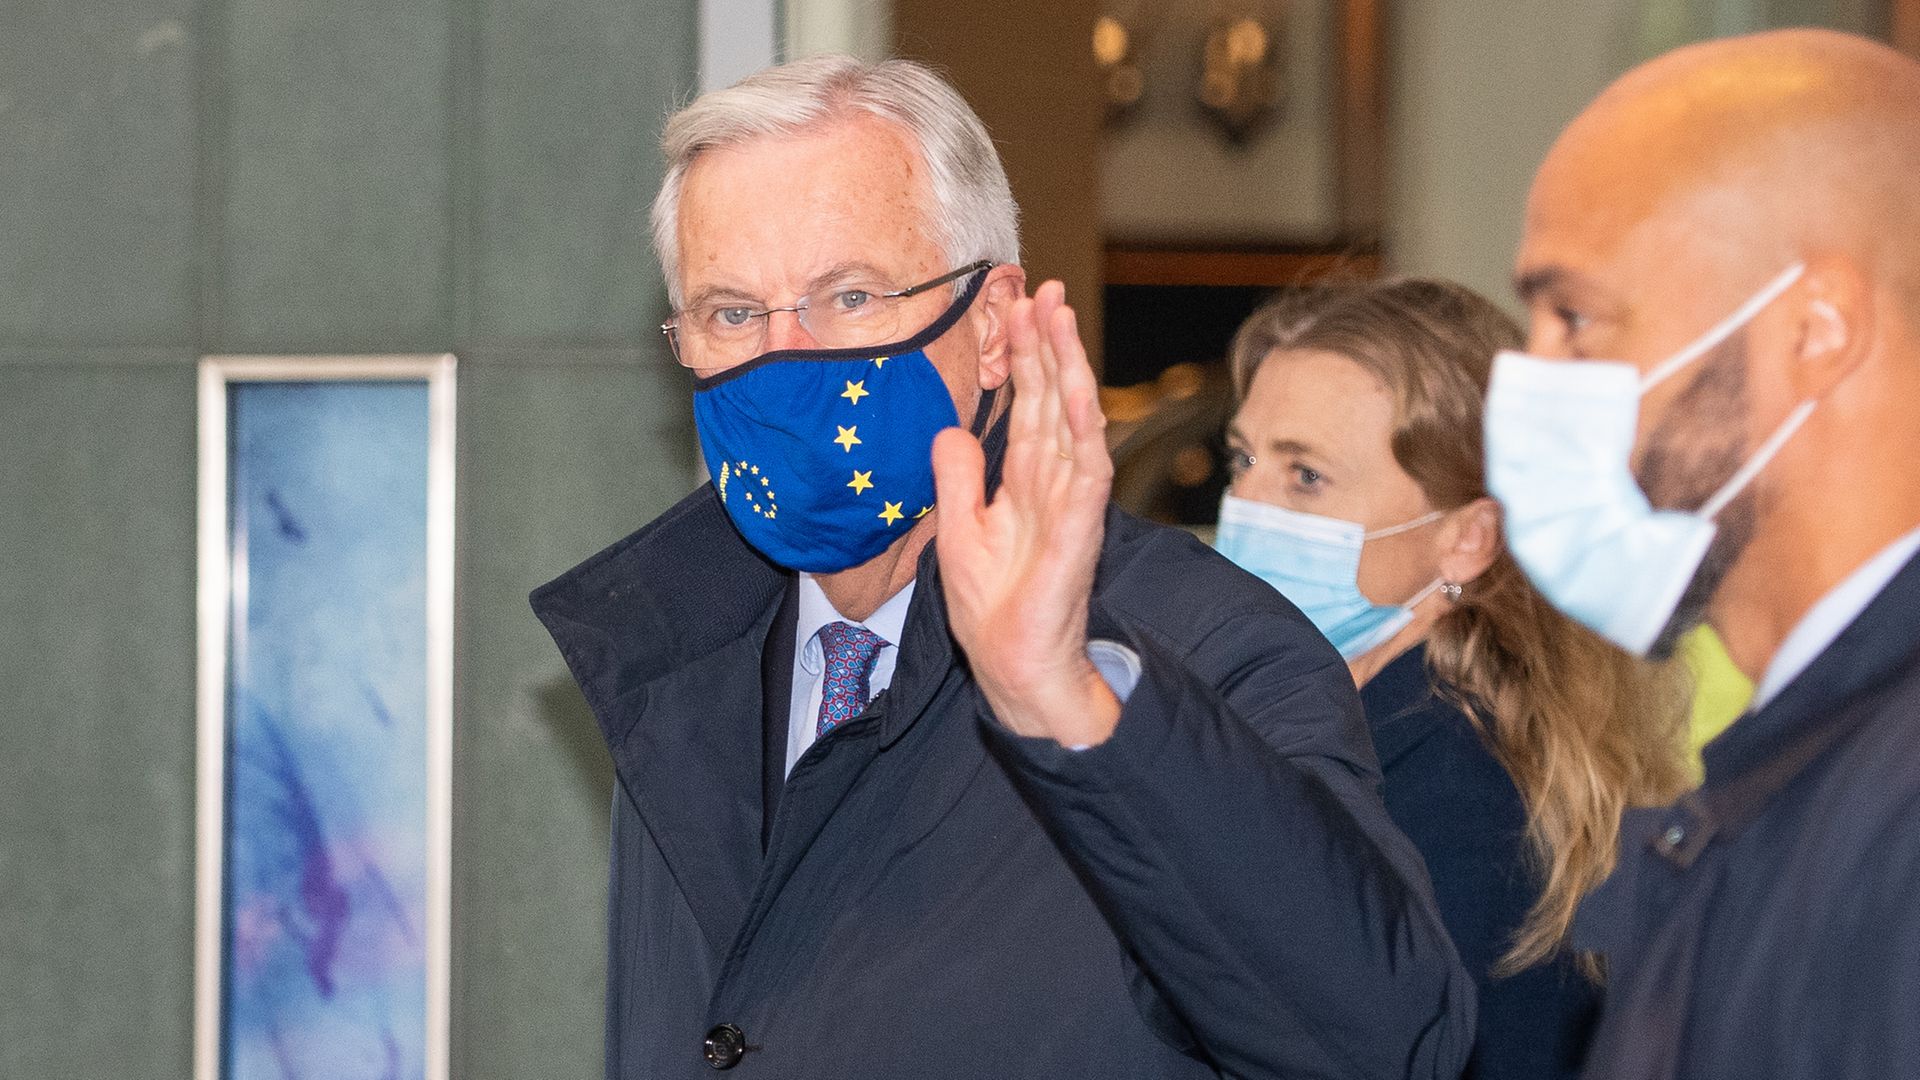 EU's chief negotiator Michel Barnier walking with other members of the EU delegation - Credit: PA